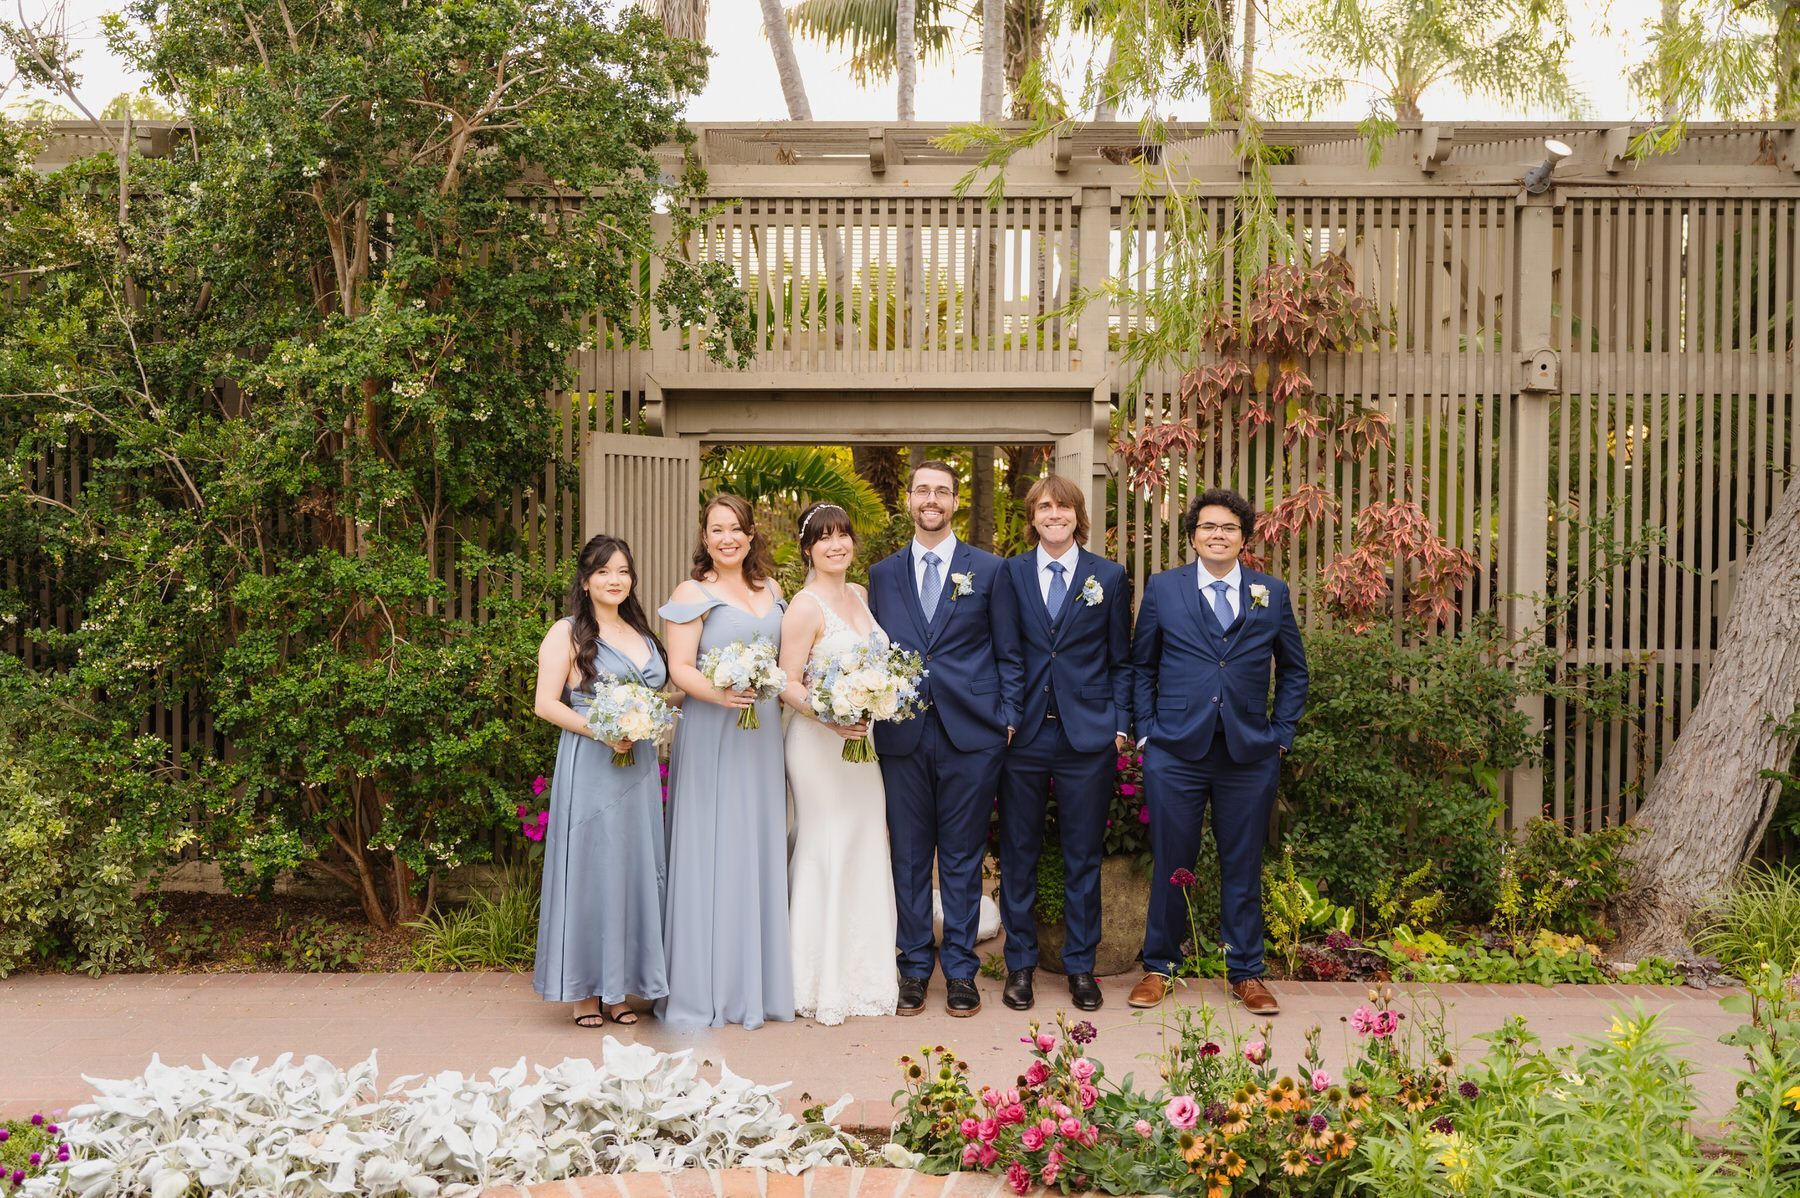 The bride and groom are posing for a picture with their wedding party.